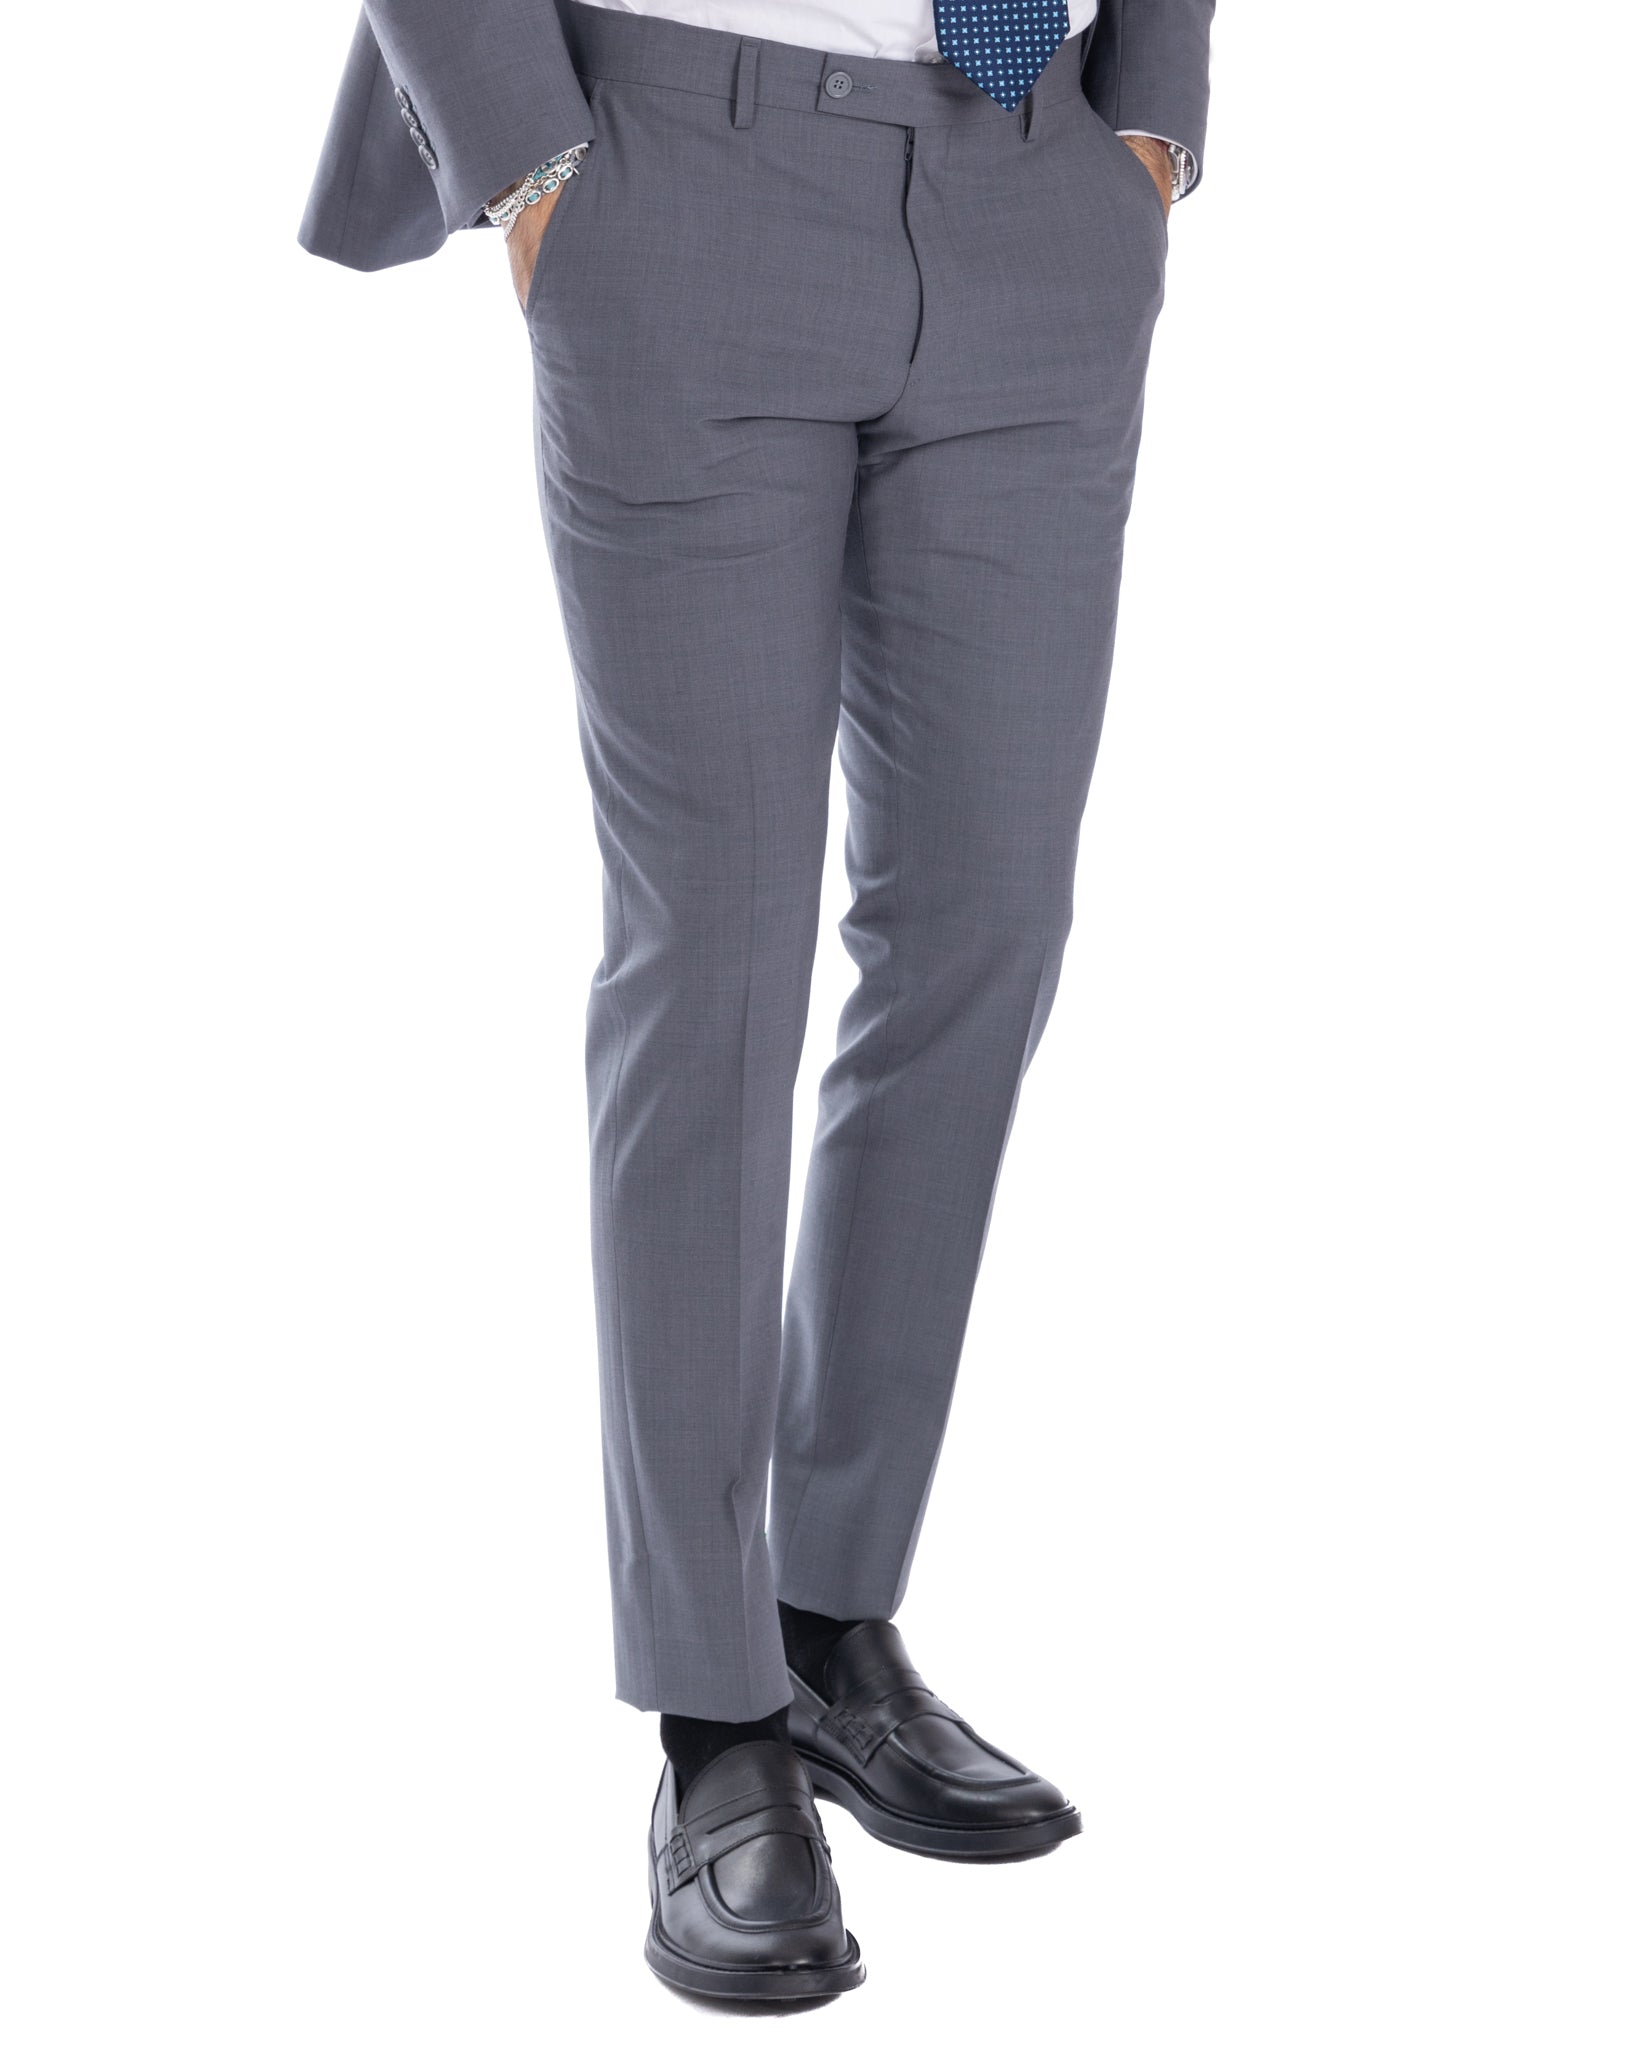 New york - gray wool single-breasted suit